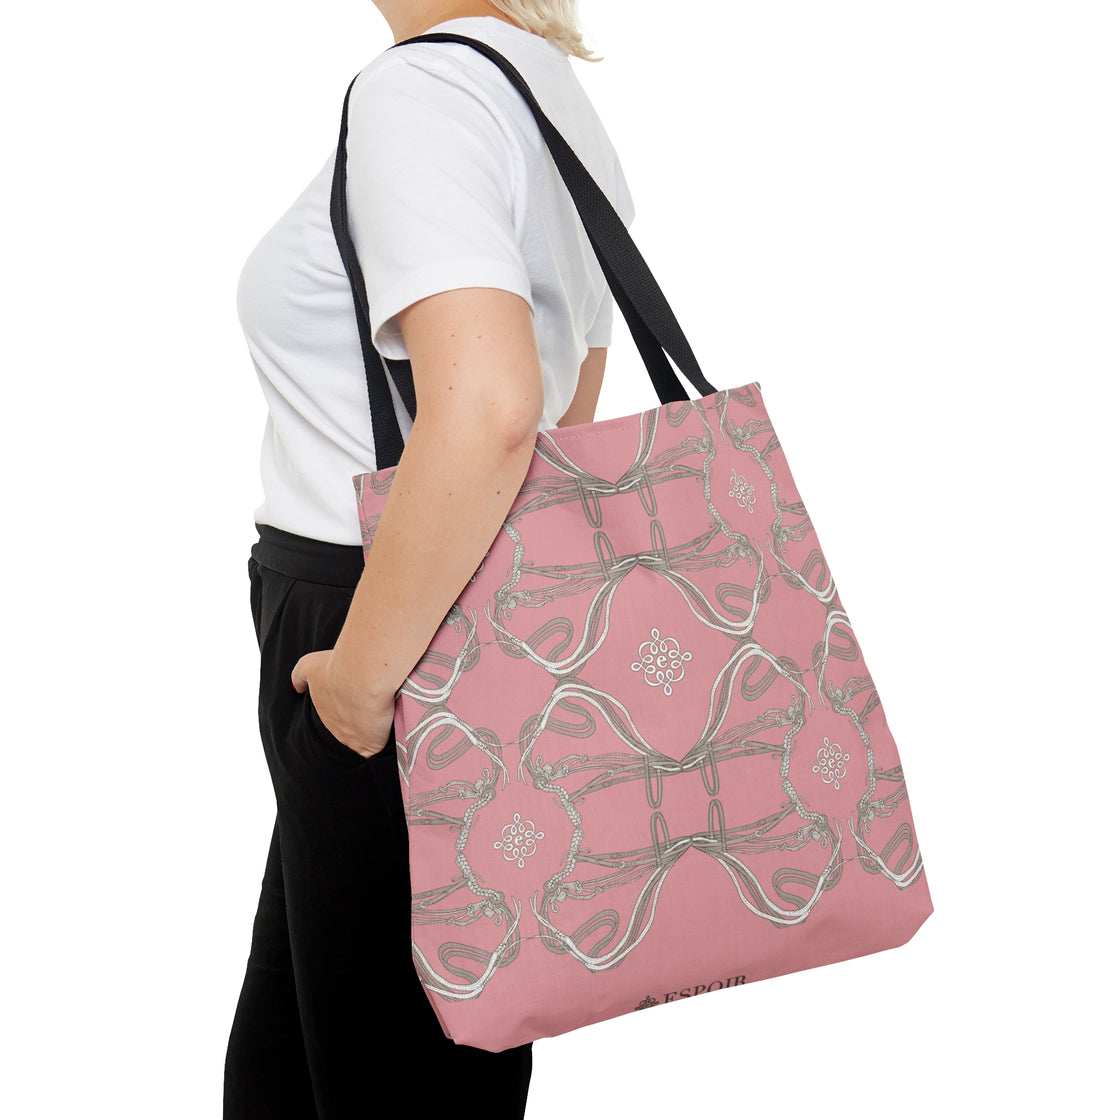 Tote Bag in Roped Bridles on Rose